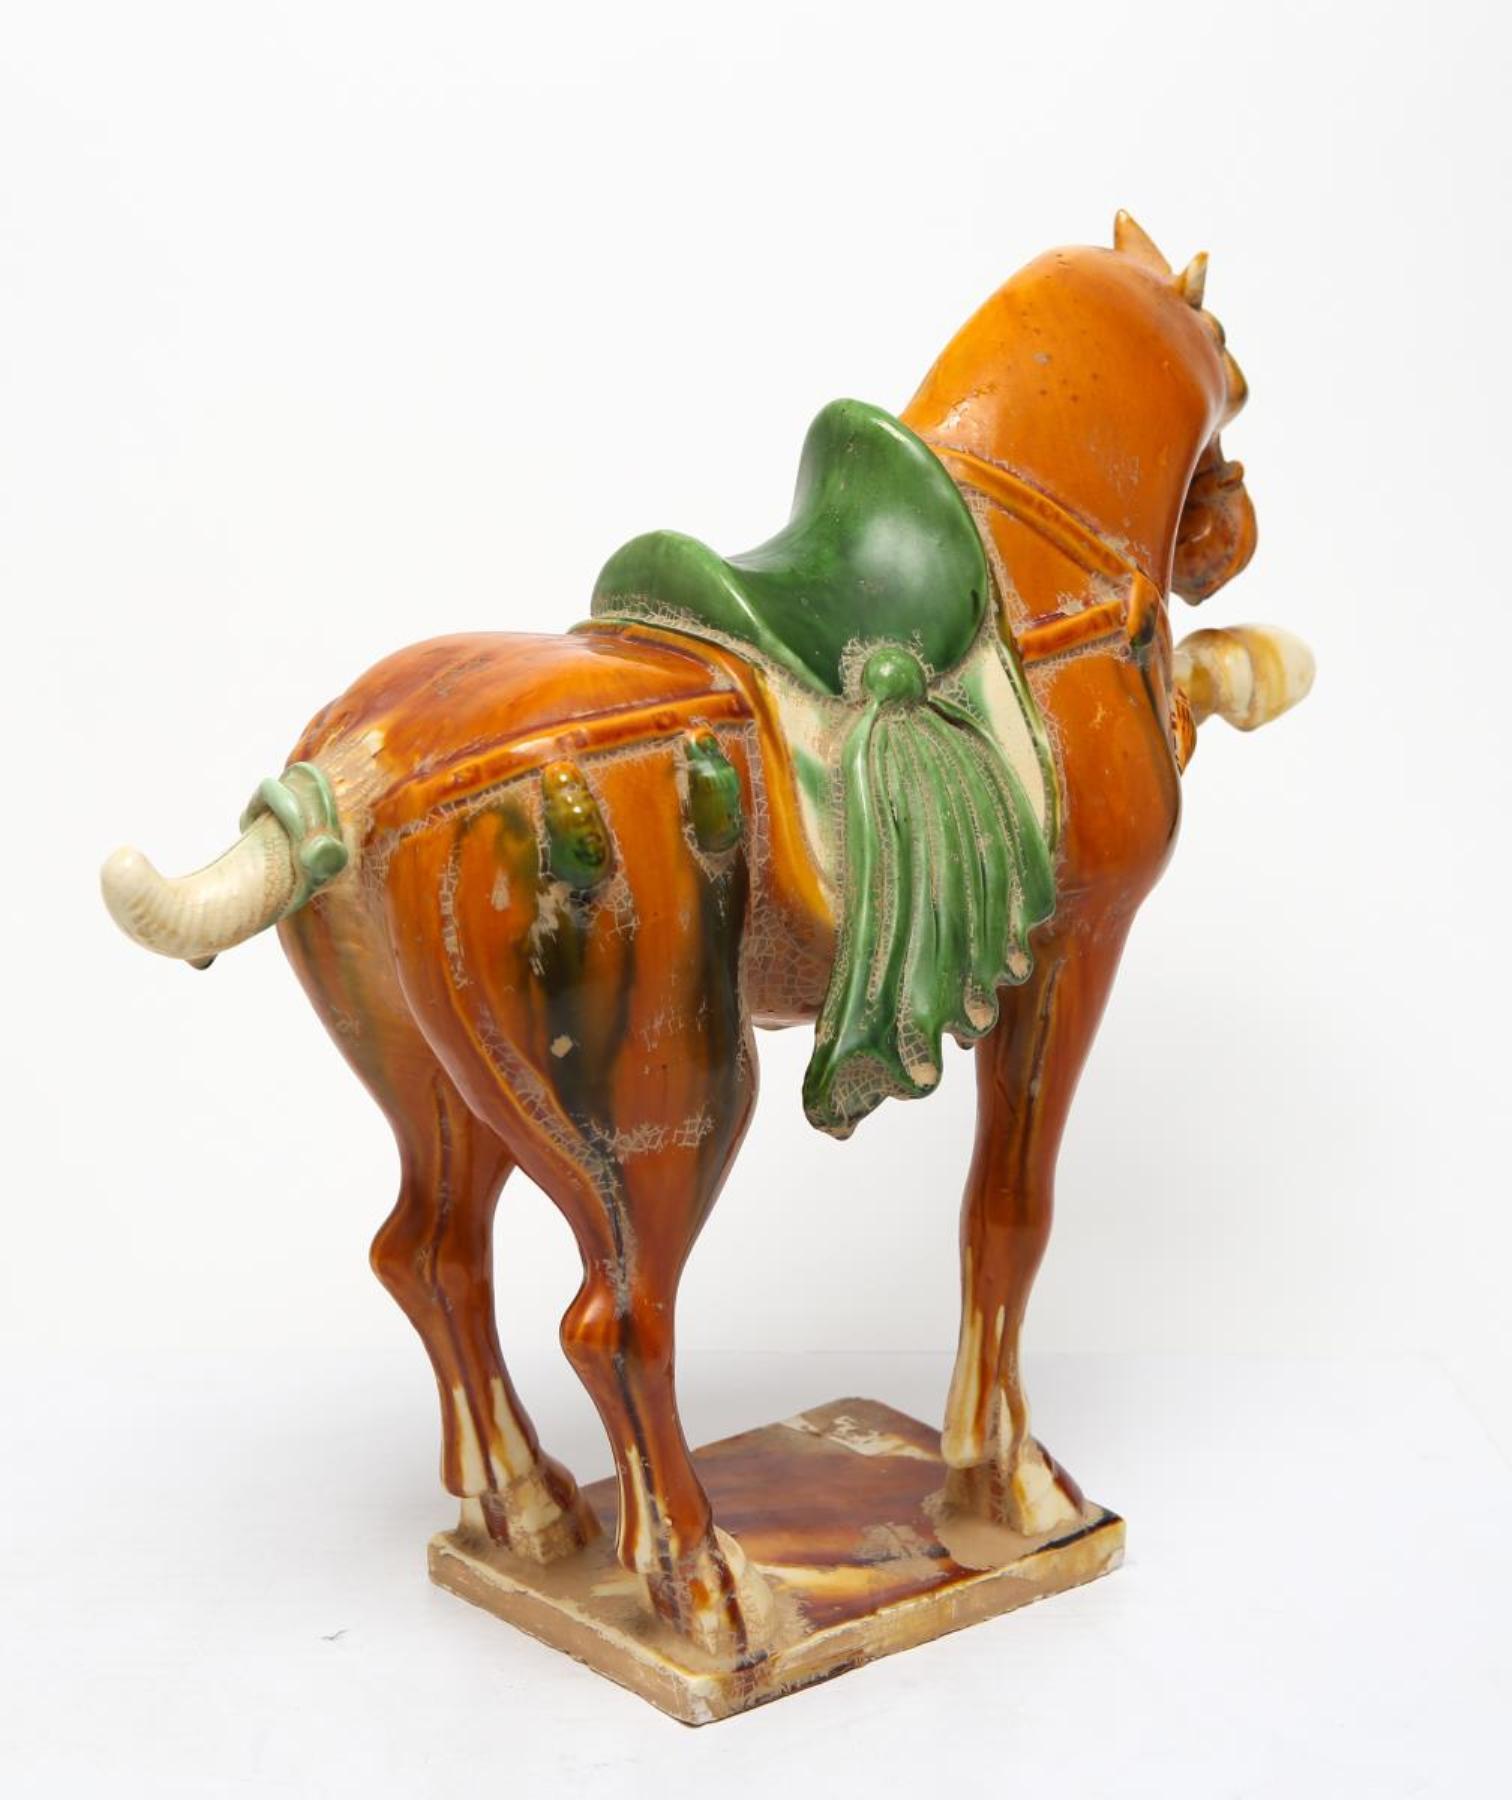 Chinese Tang-manner horse sculpture in Sancai-glazed pottery, with left front leg raised. Repairs to raised leg and lacking tip of left ear. In overall great vintage condition.